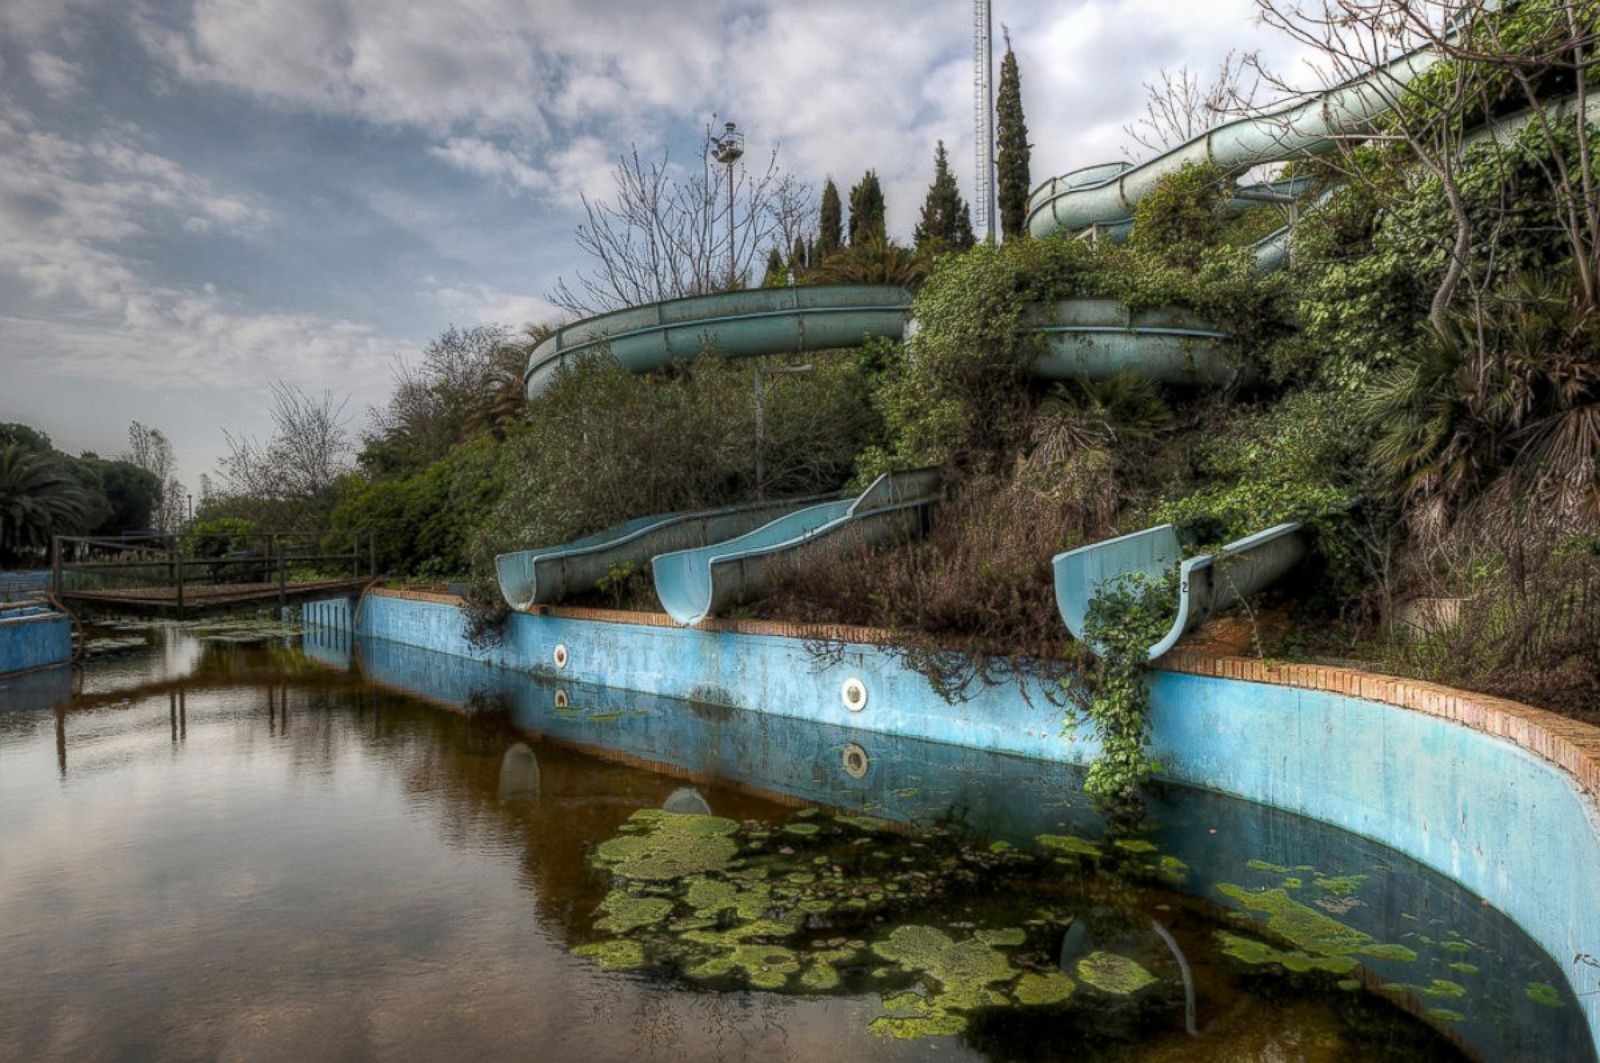 Images of These Abandoned Places Will Give You Chills Photos | Image #1